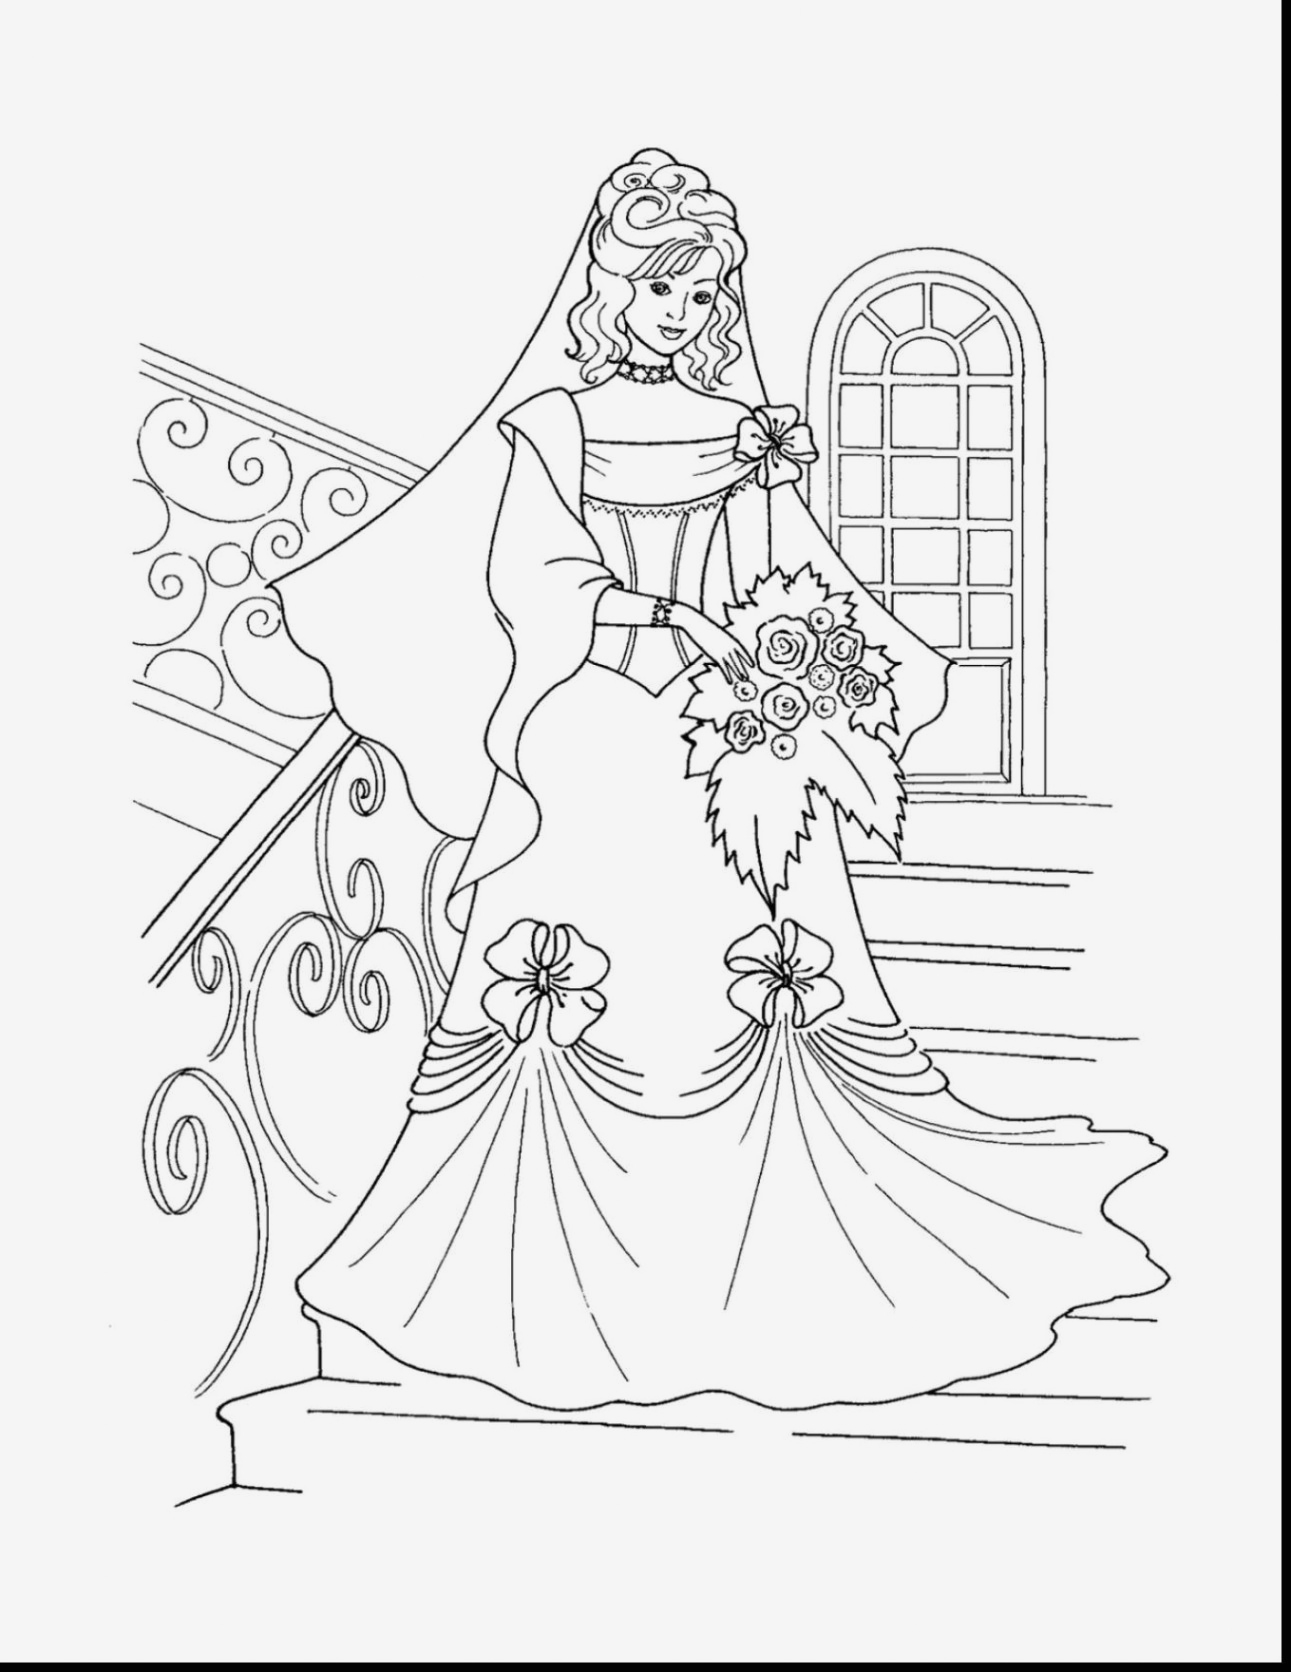 Printable Princess Coloring Pages Free Coloring Ideas Princess Coloring Pages To Print With Free